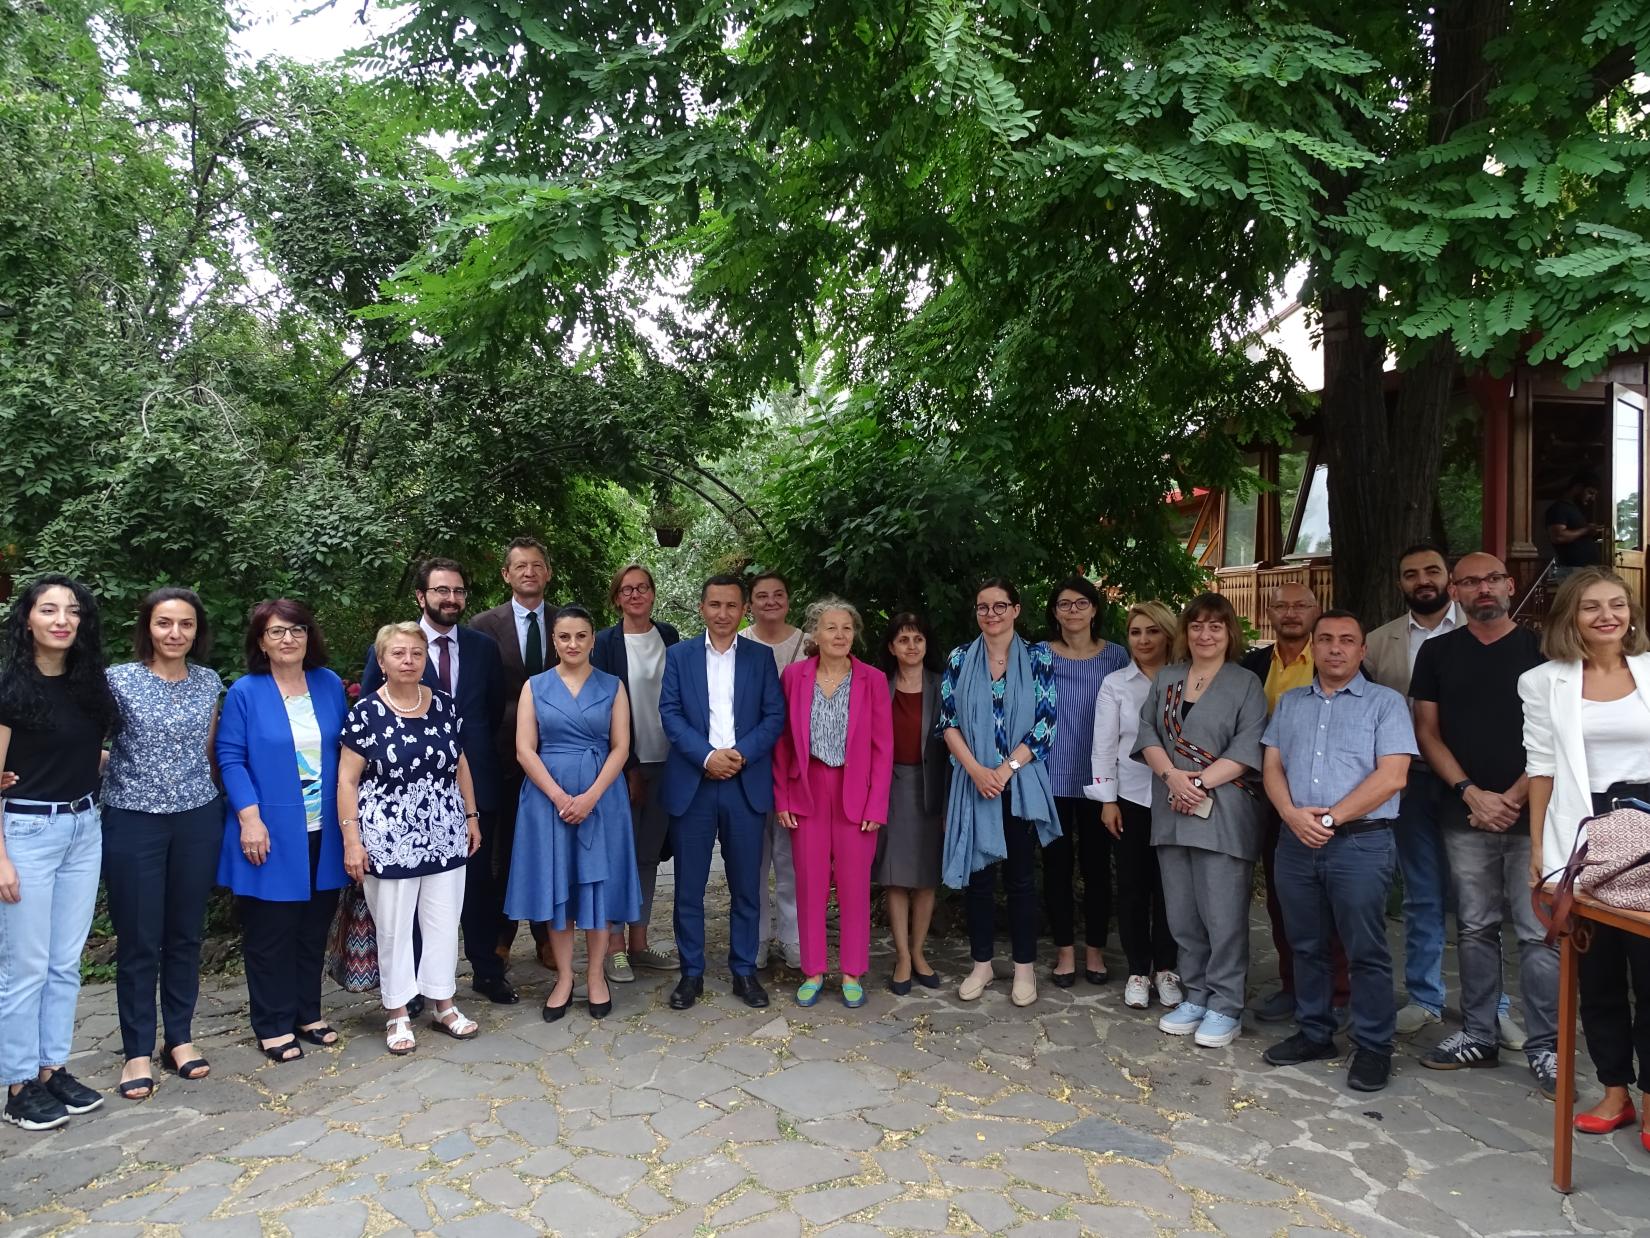 The UN Armenia’s Country Team, consisting of twenty people, with the Governor of Syunik region.